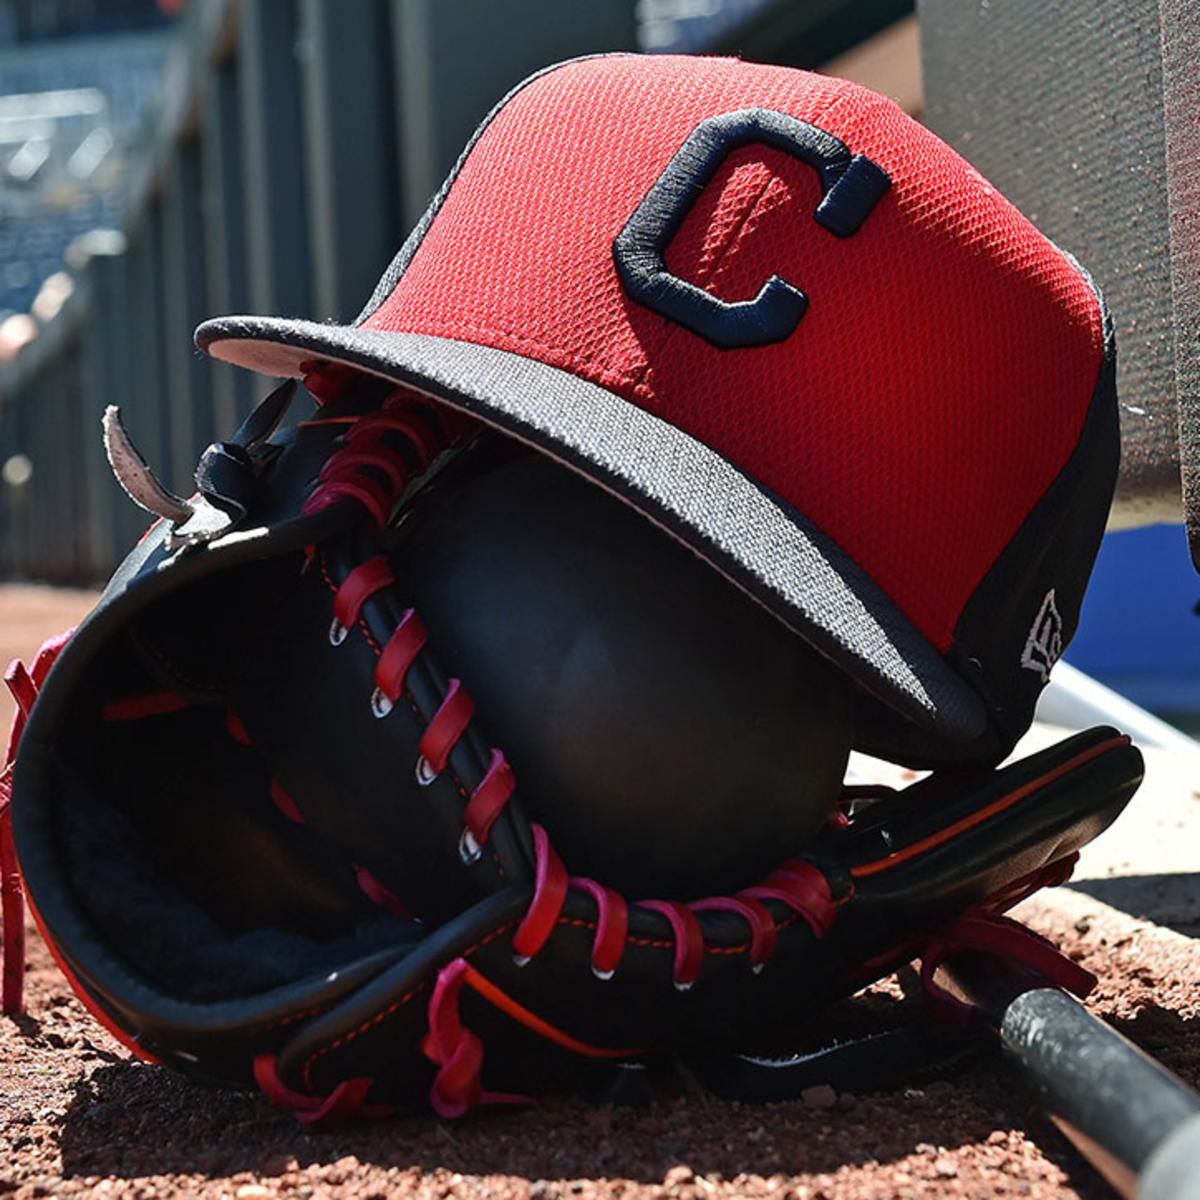 Hats and Tats: A Lifestyle: July 20- Cleveland Indians